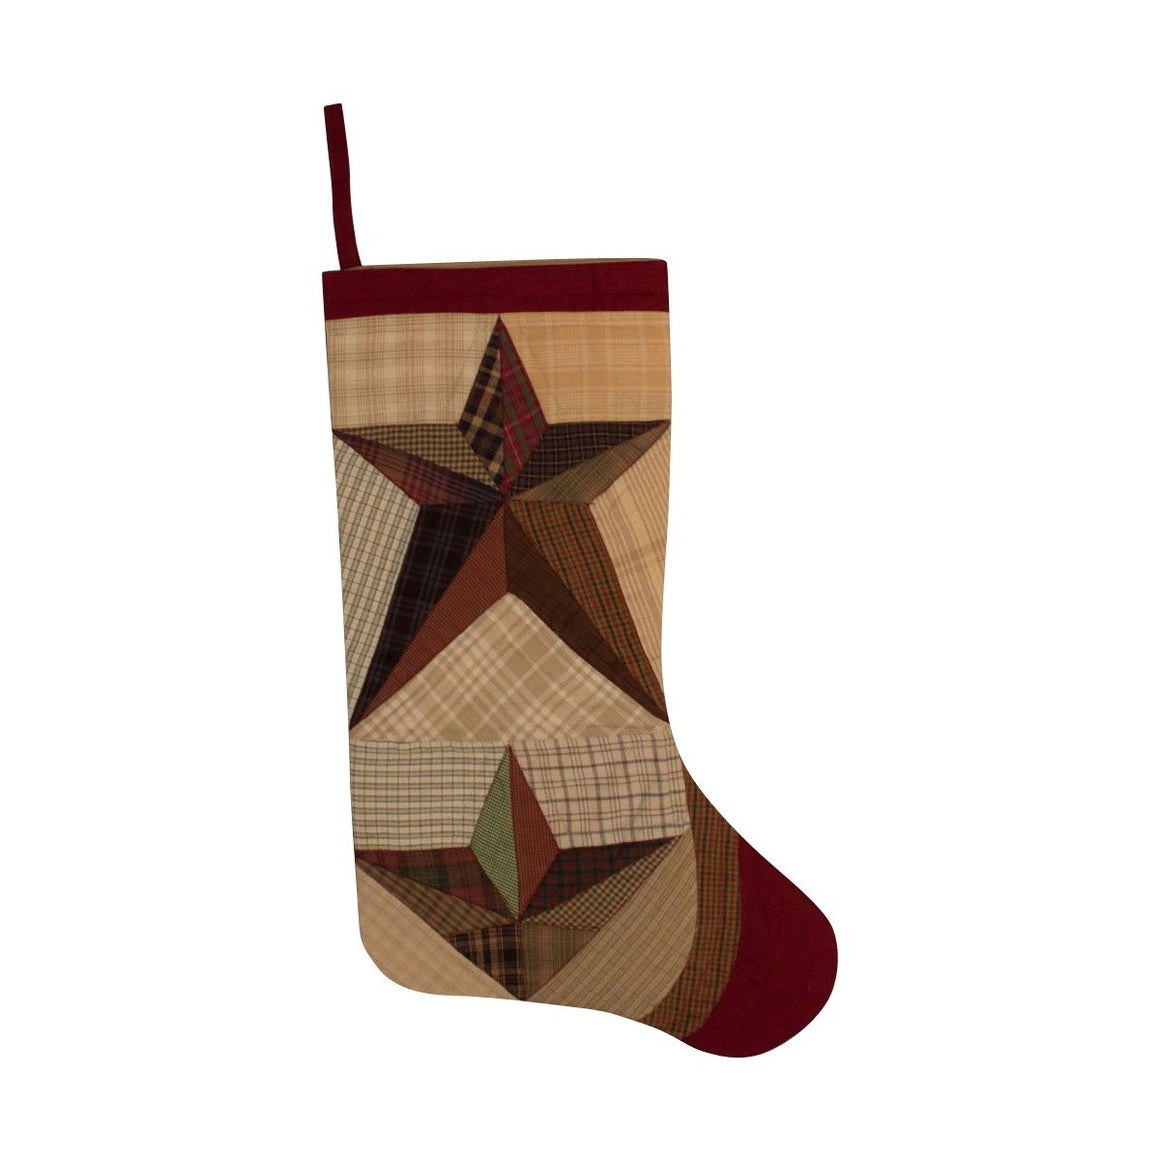 Scrappy Star Quilted Stocking